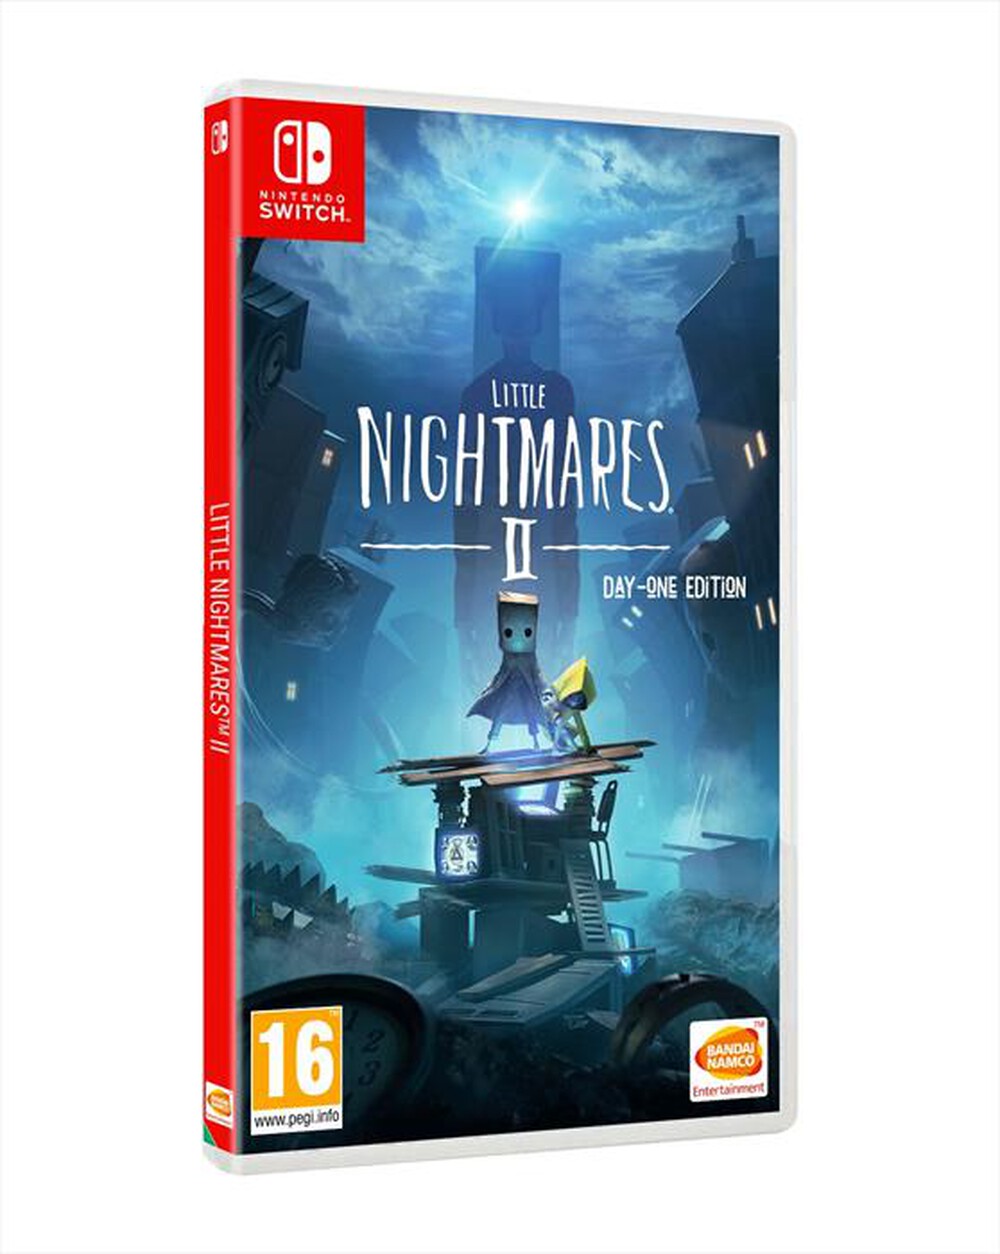 "NAMCO - LITTLE NIGHTMARES - DAY 1 EDITION - "